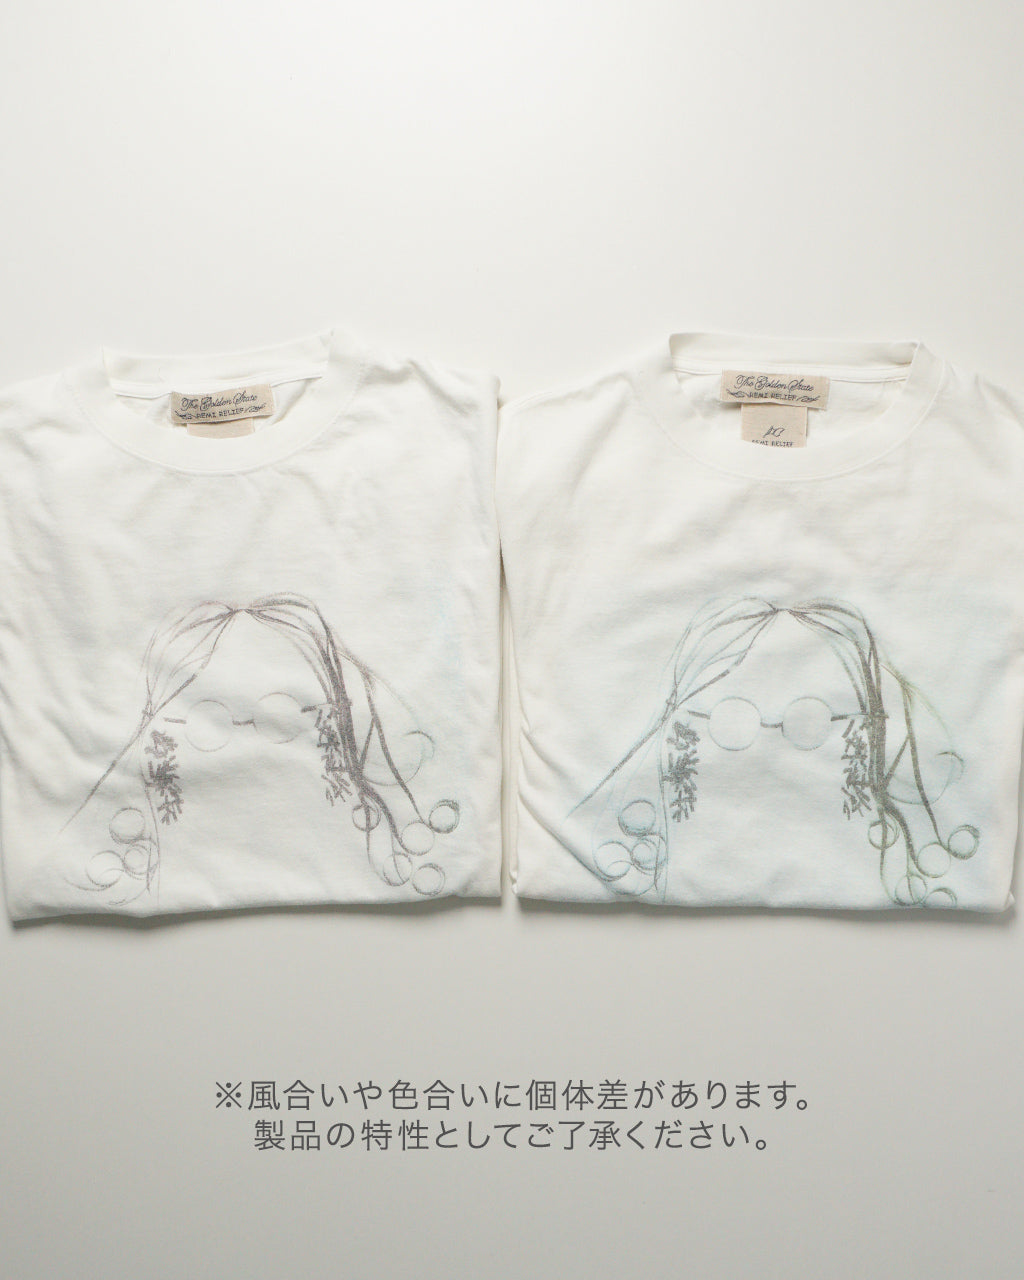 REMI RELIEF HARD レミレリーフ SP加工 20/天竺レギュラーTシャツ LIVE AND LET LIVE RN26349129【送料無料】